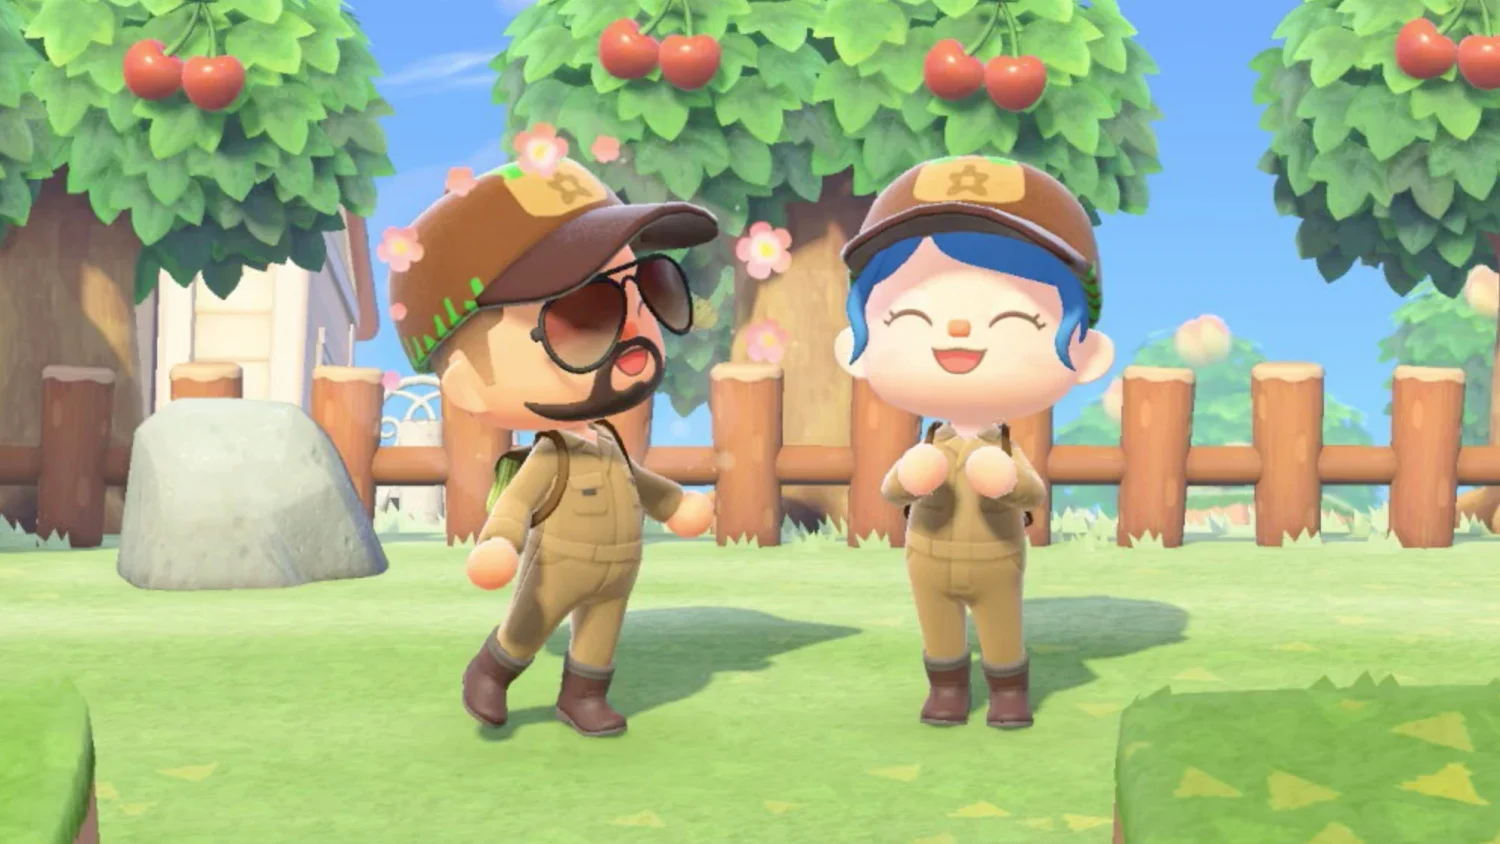 Animal Crossing player starts up a weed removal service in New Horizons